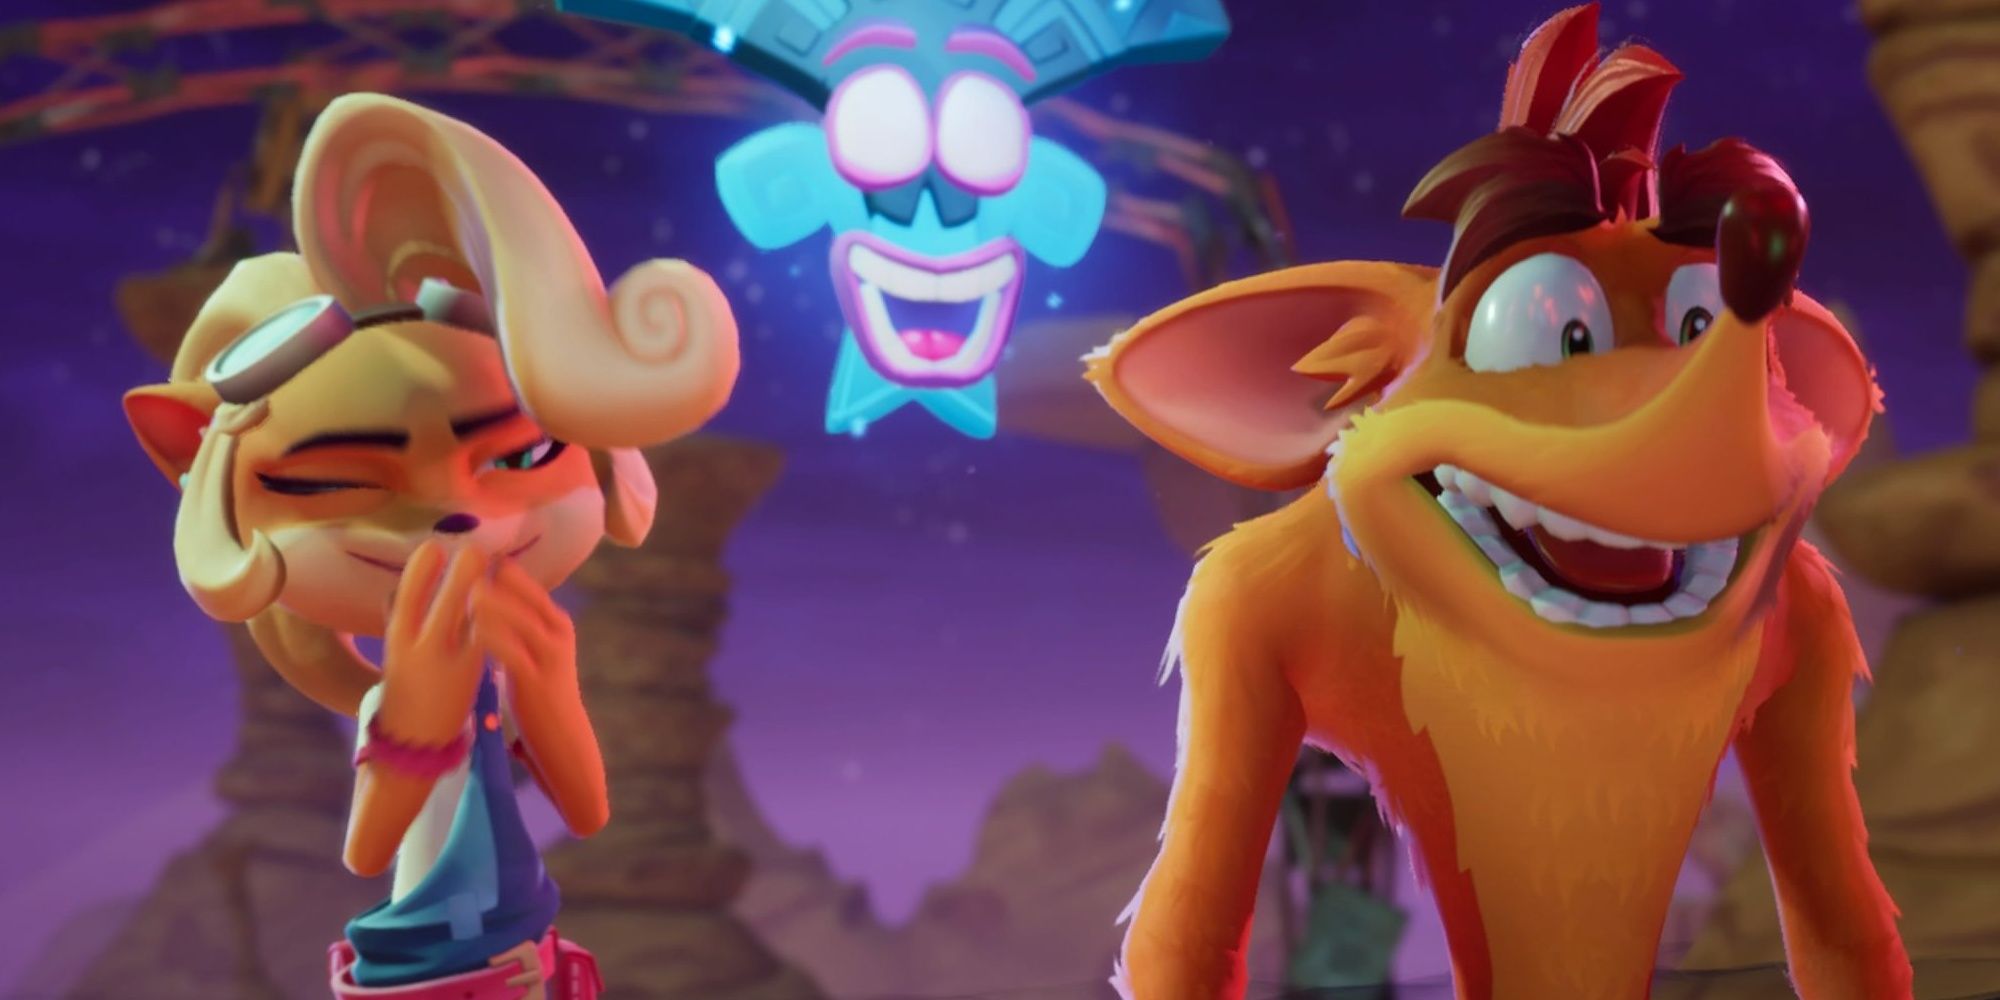 Crash, Coco and Lani-Loli, from Crash Bandicoot 4: It's About Time